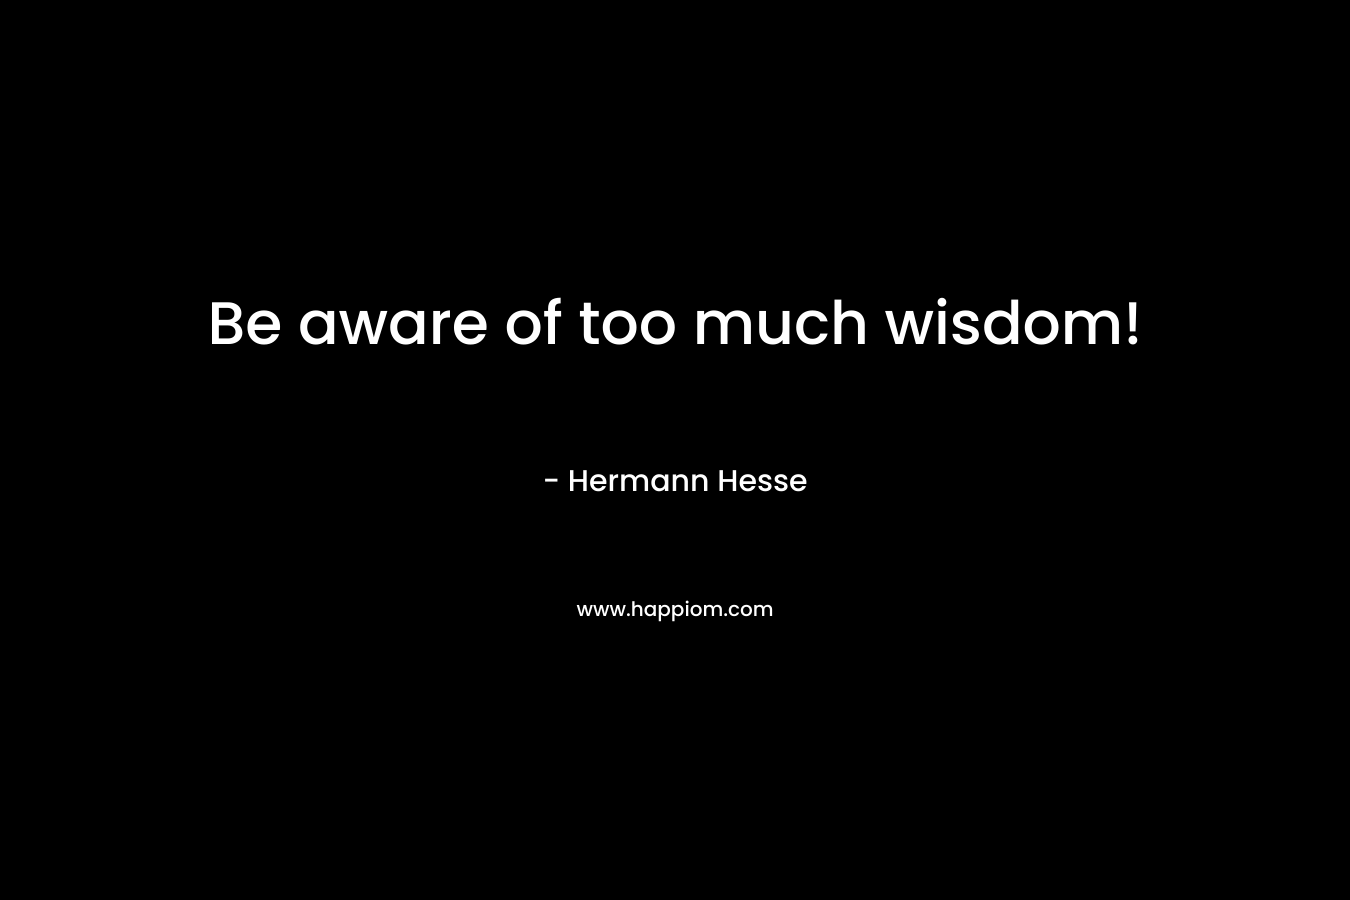 Be aware of too much wisdom!